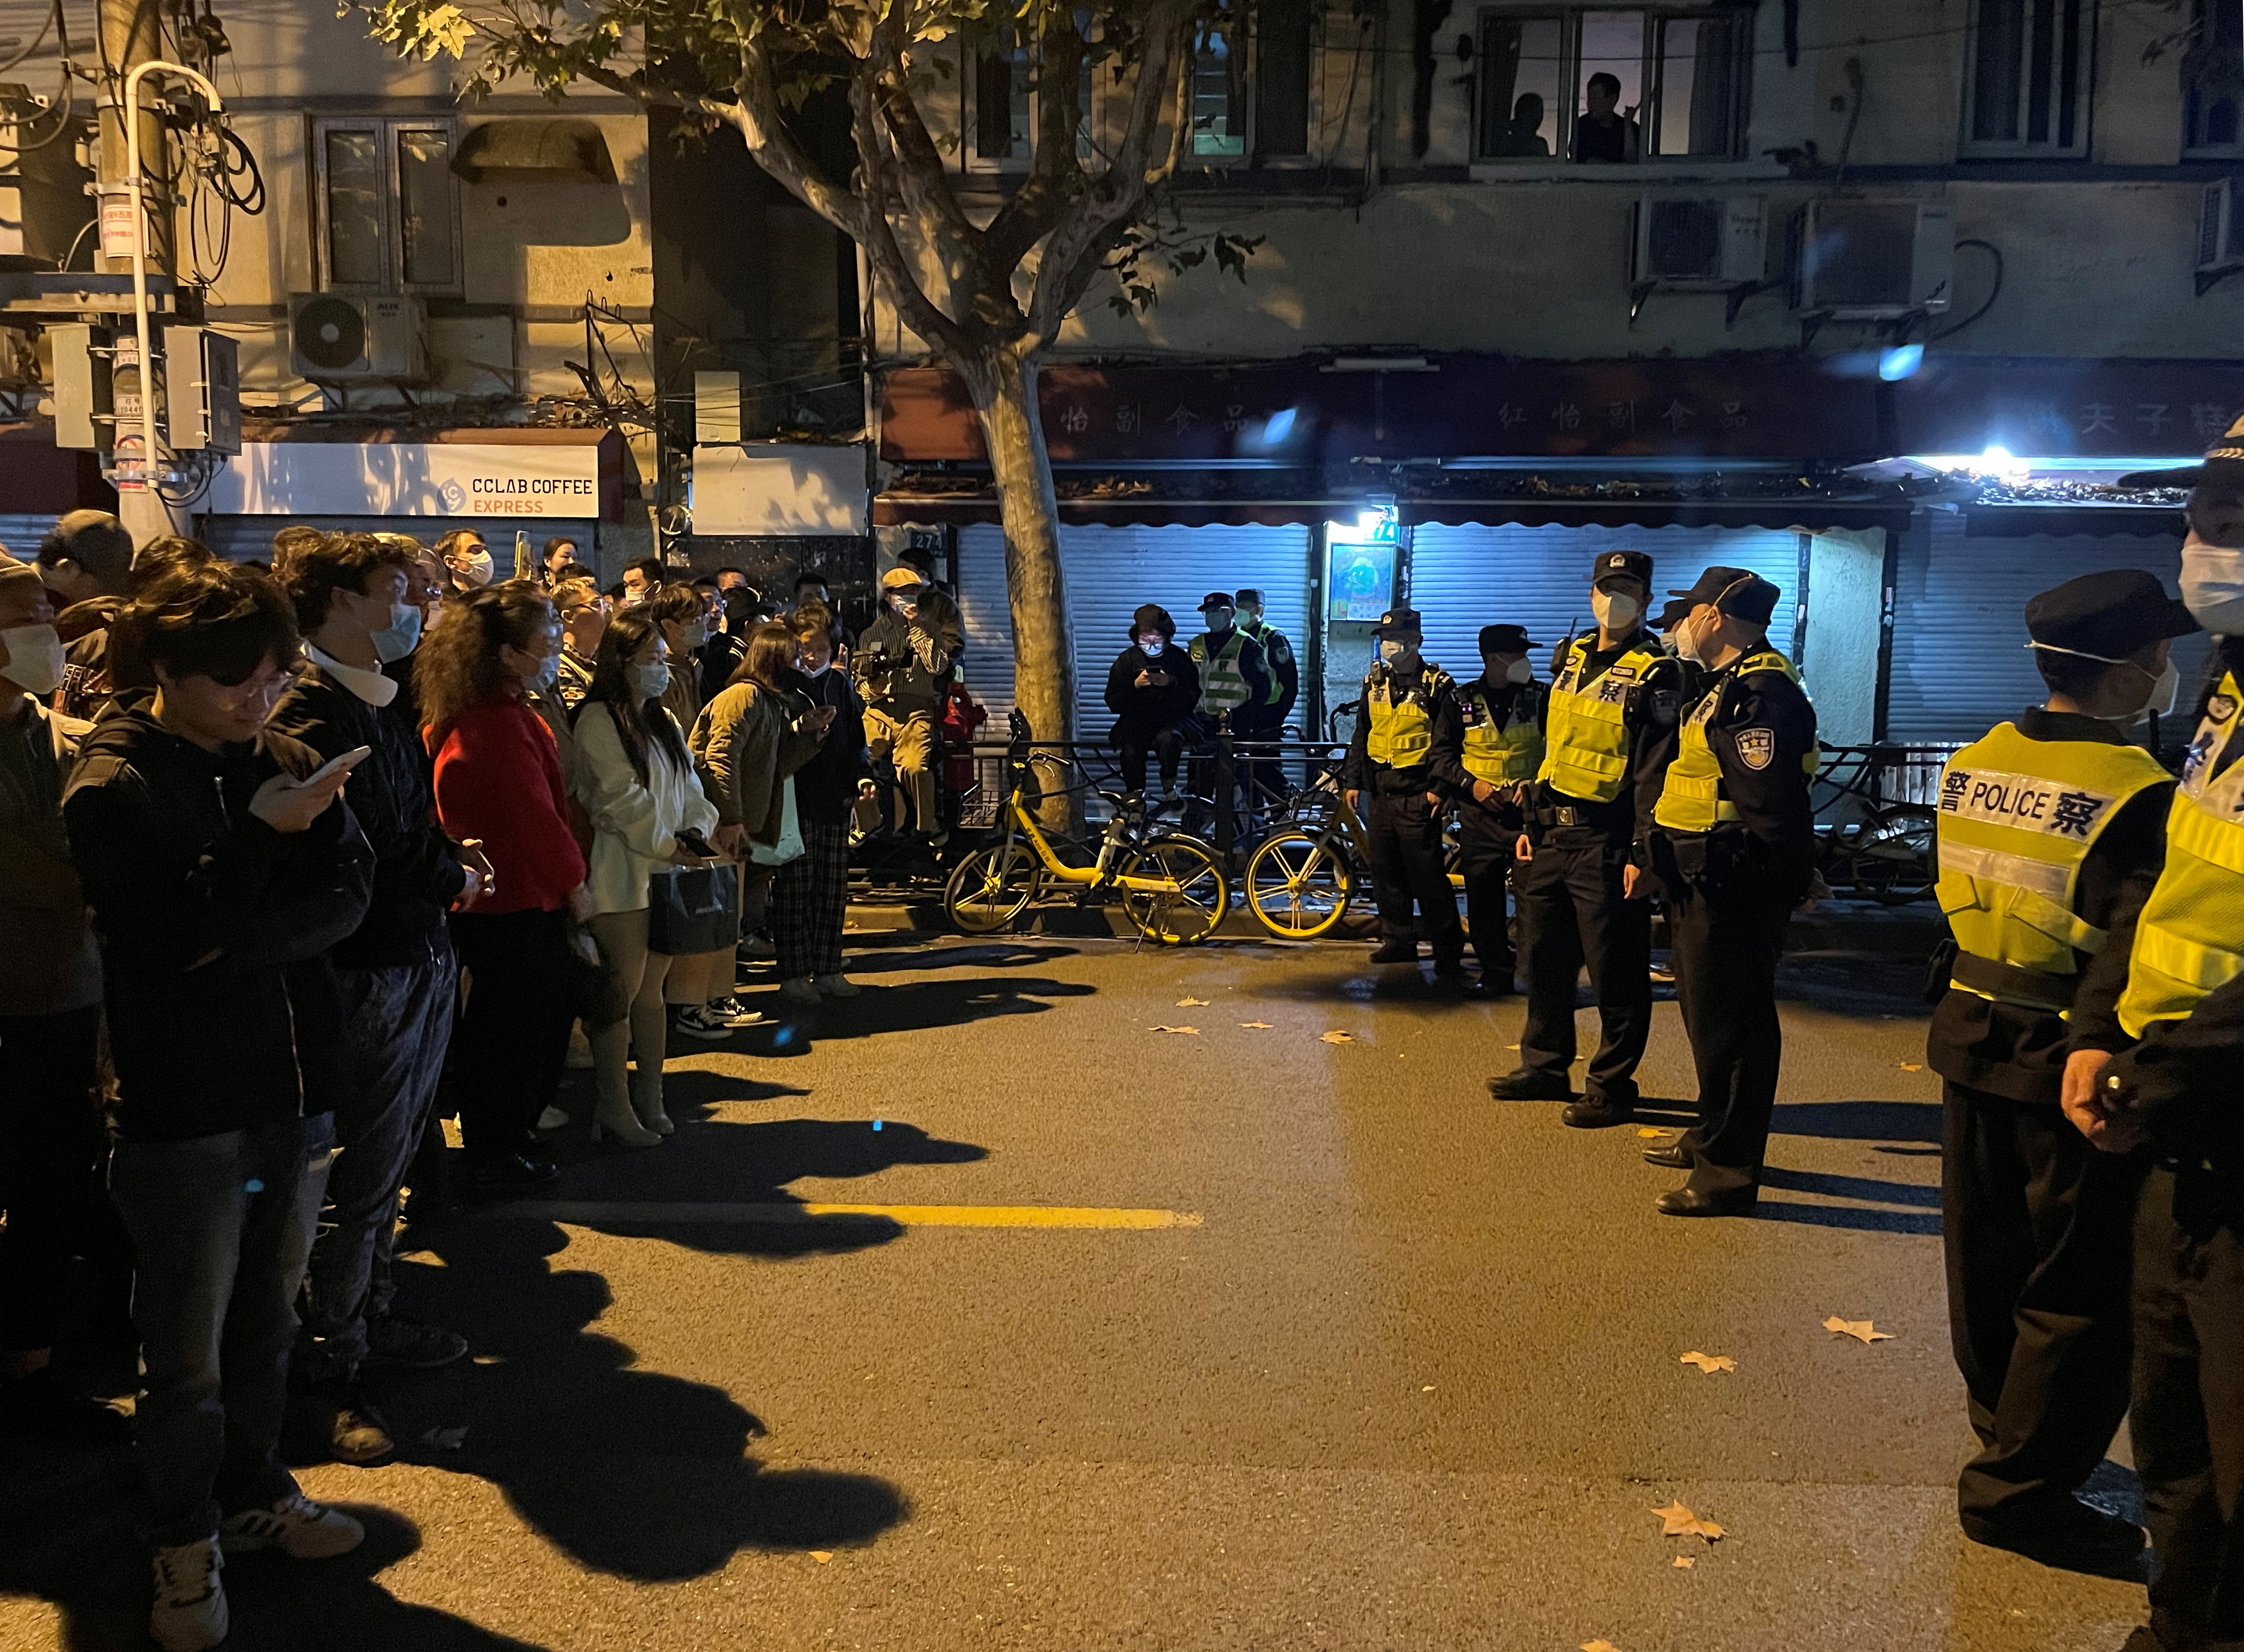 People stand in front of a line of police officers in Shanghai